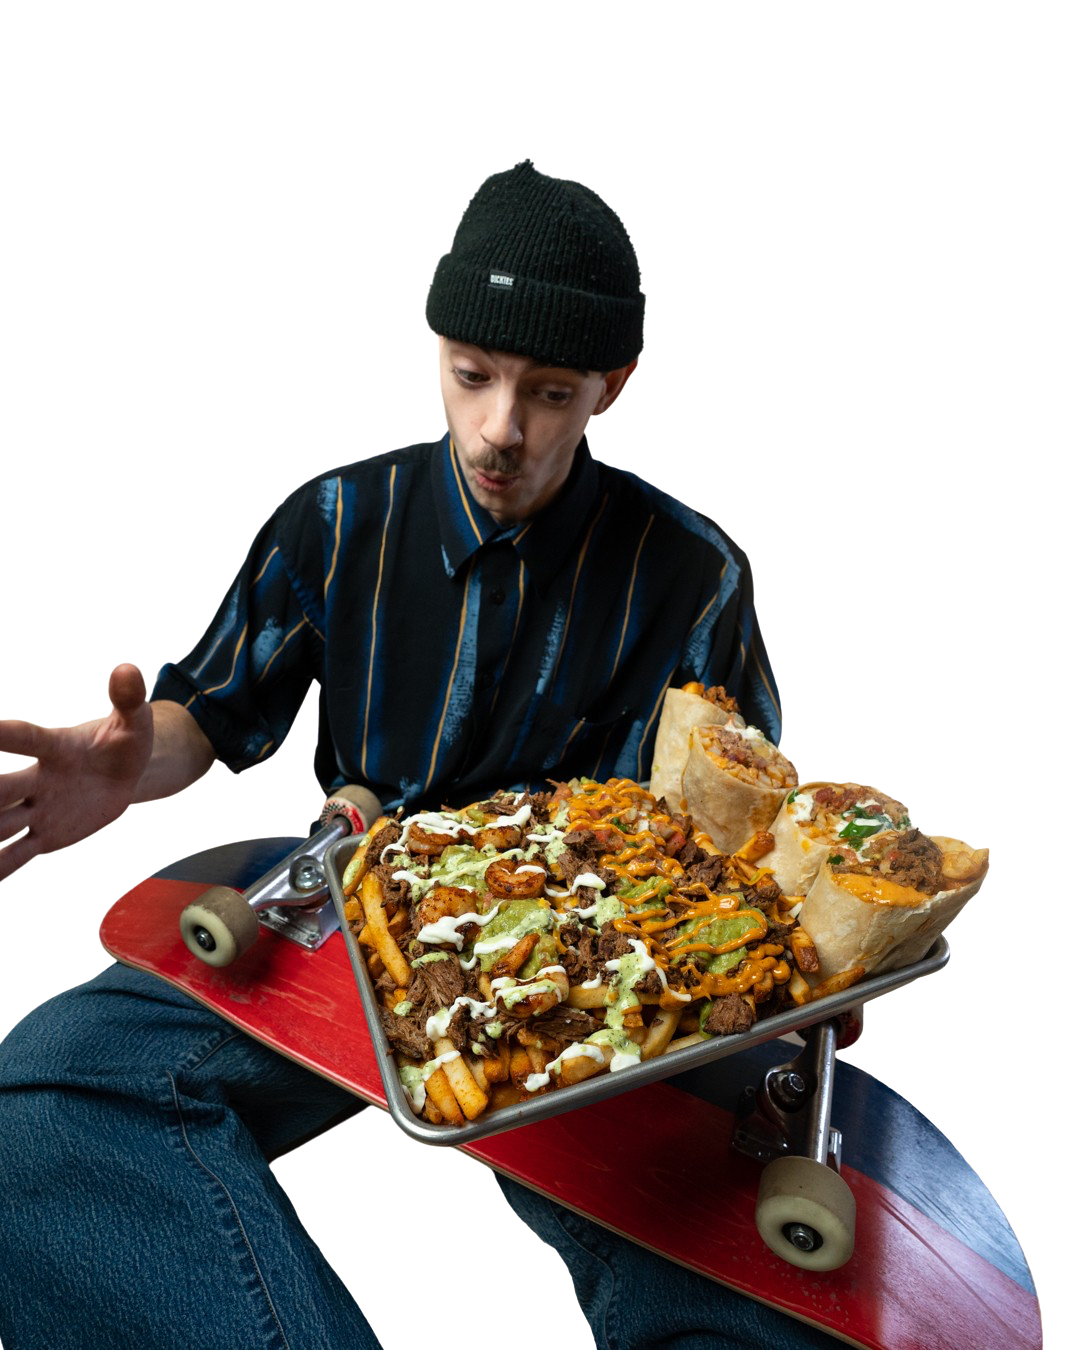 Image of man with skateboard and food tray